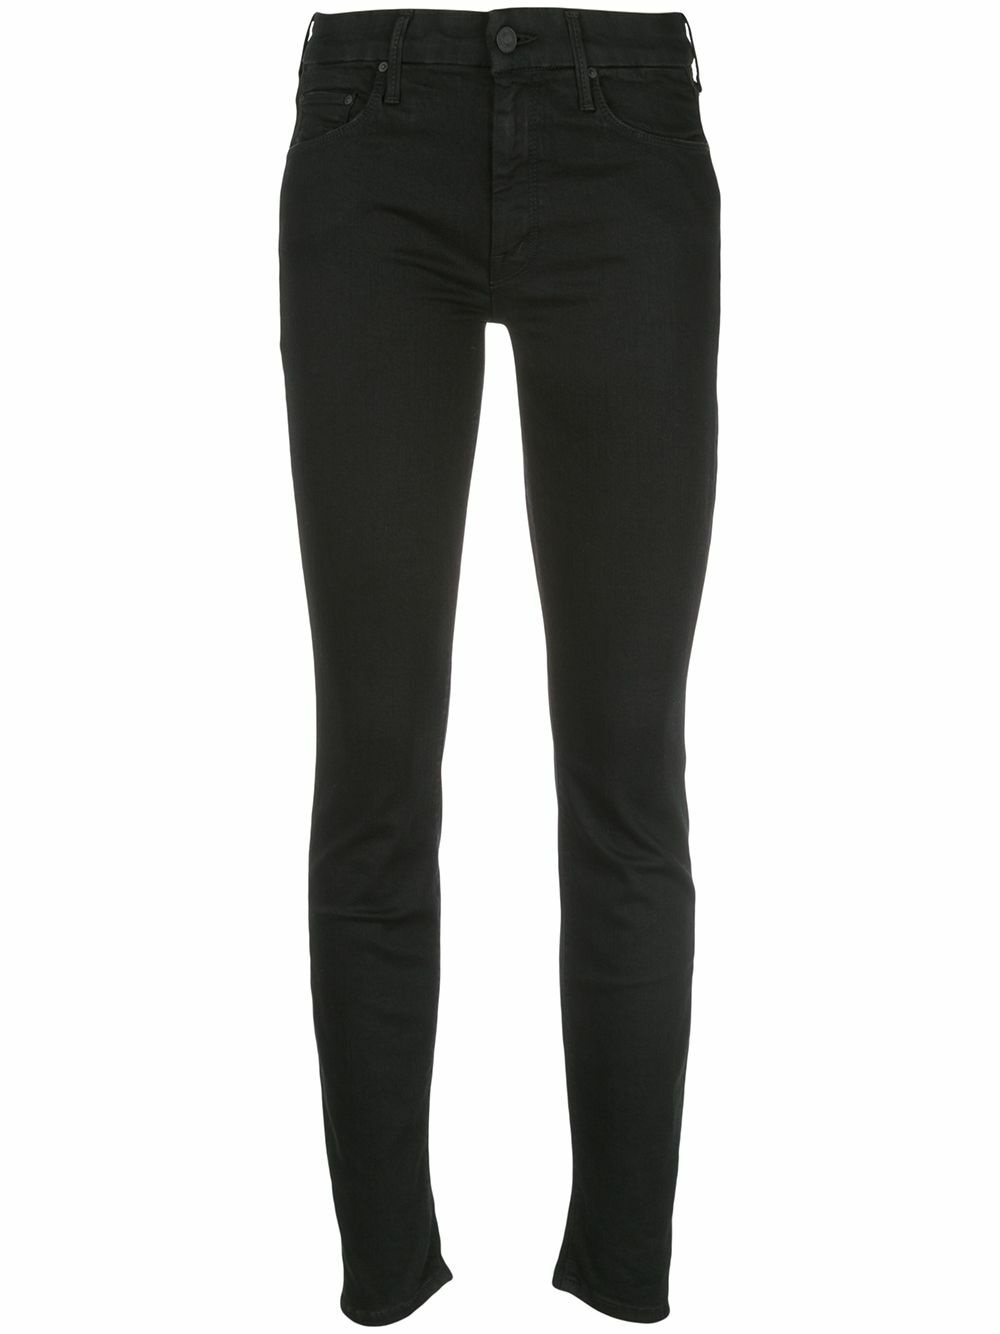 MOTHER - The Looker Skinny Jeans Mother